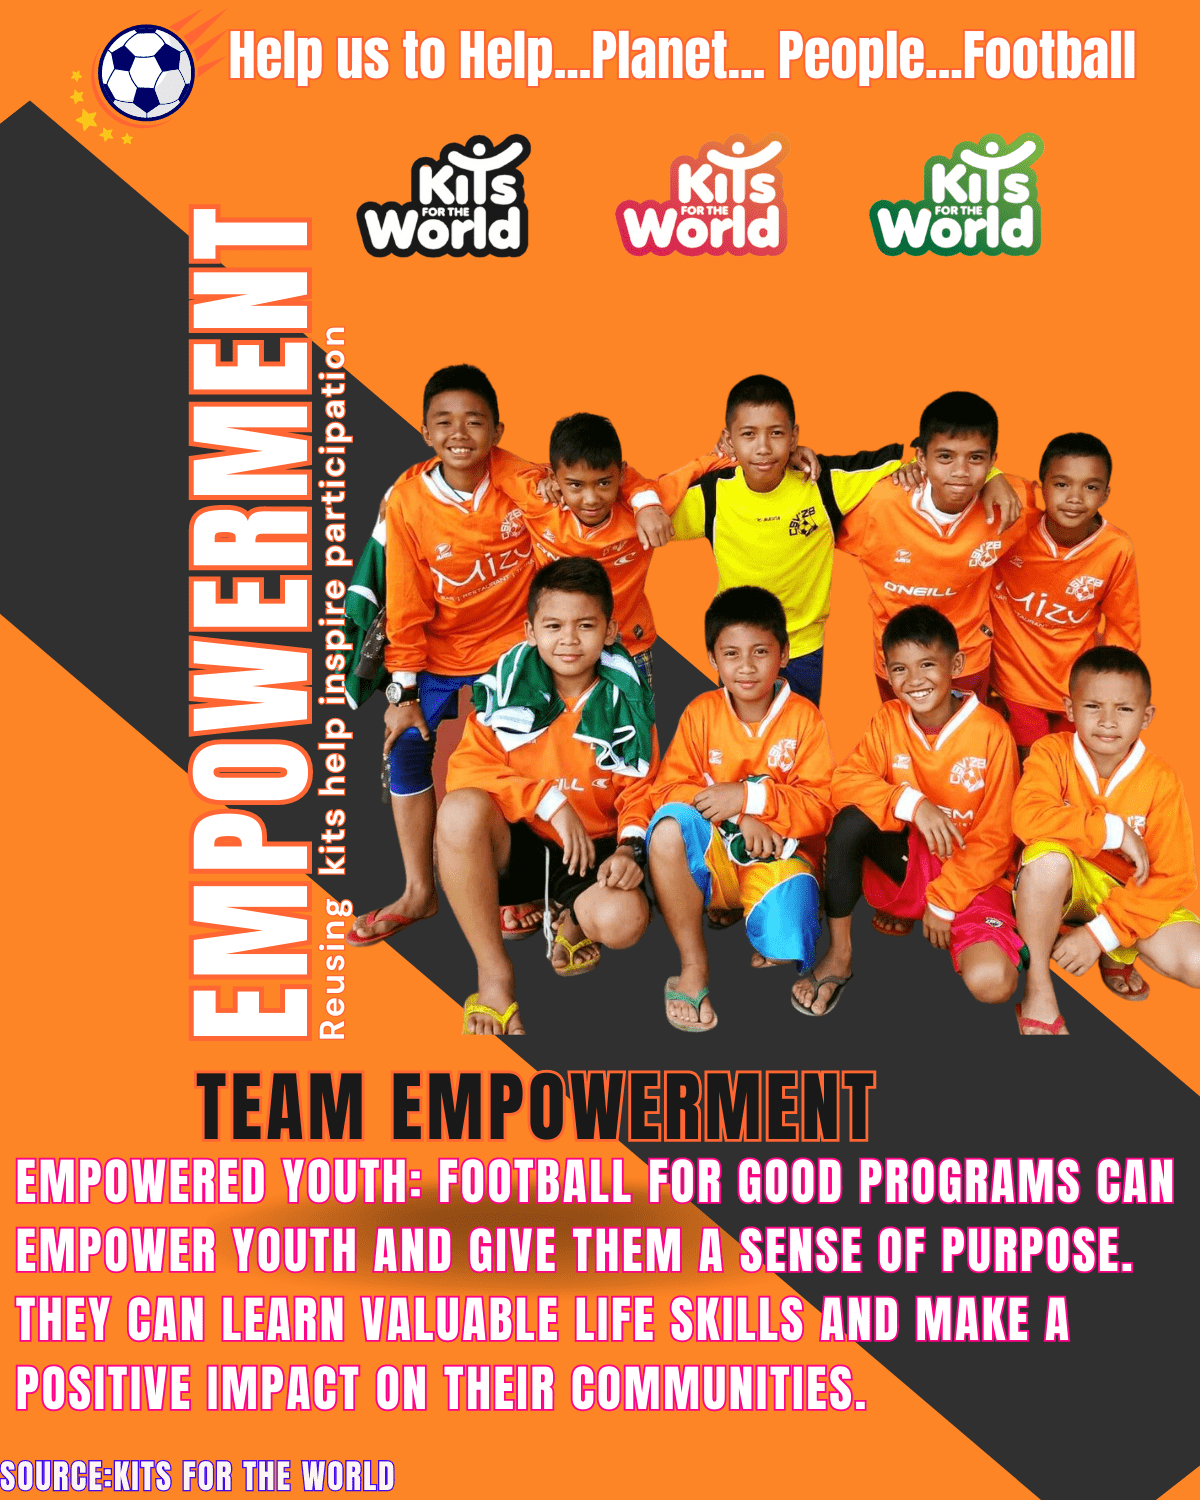 Donated football kits for football for good projects inspire participation in projects that can help change their life